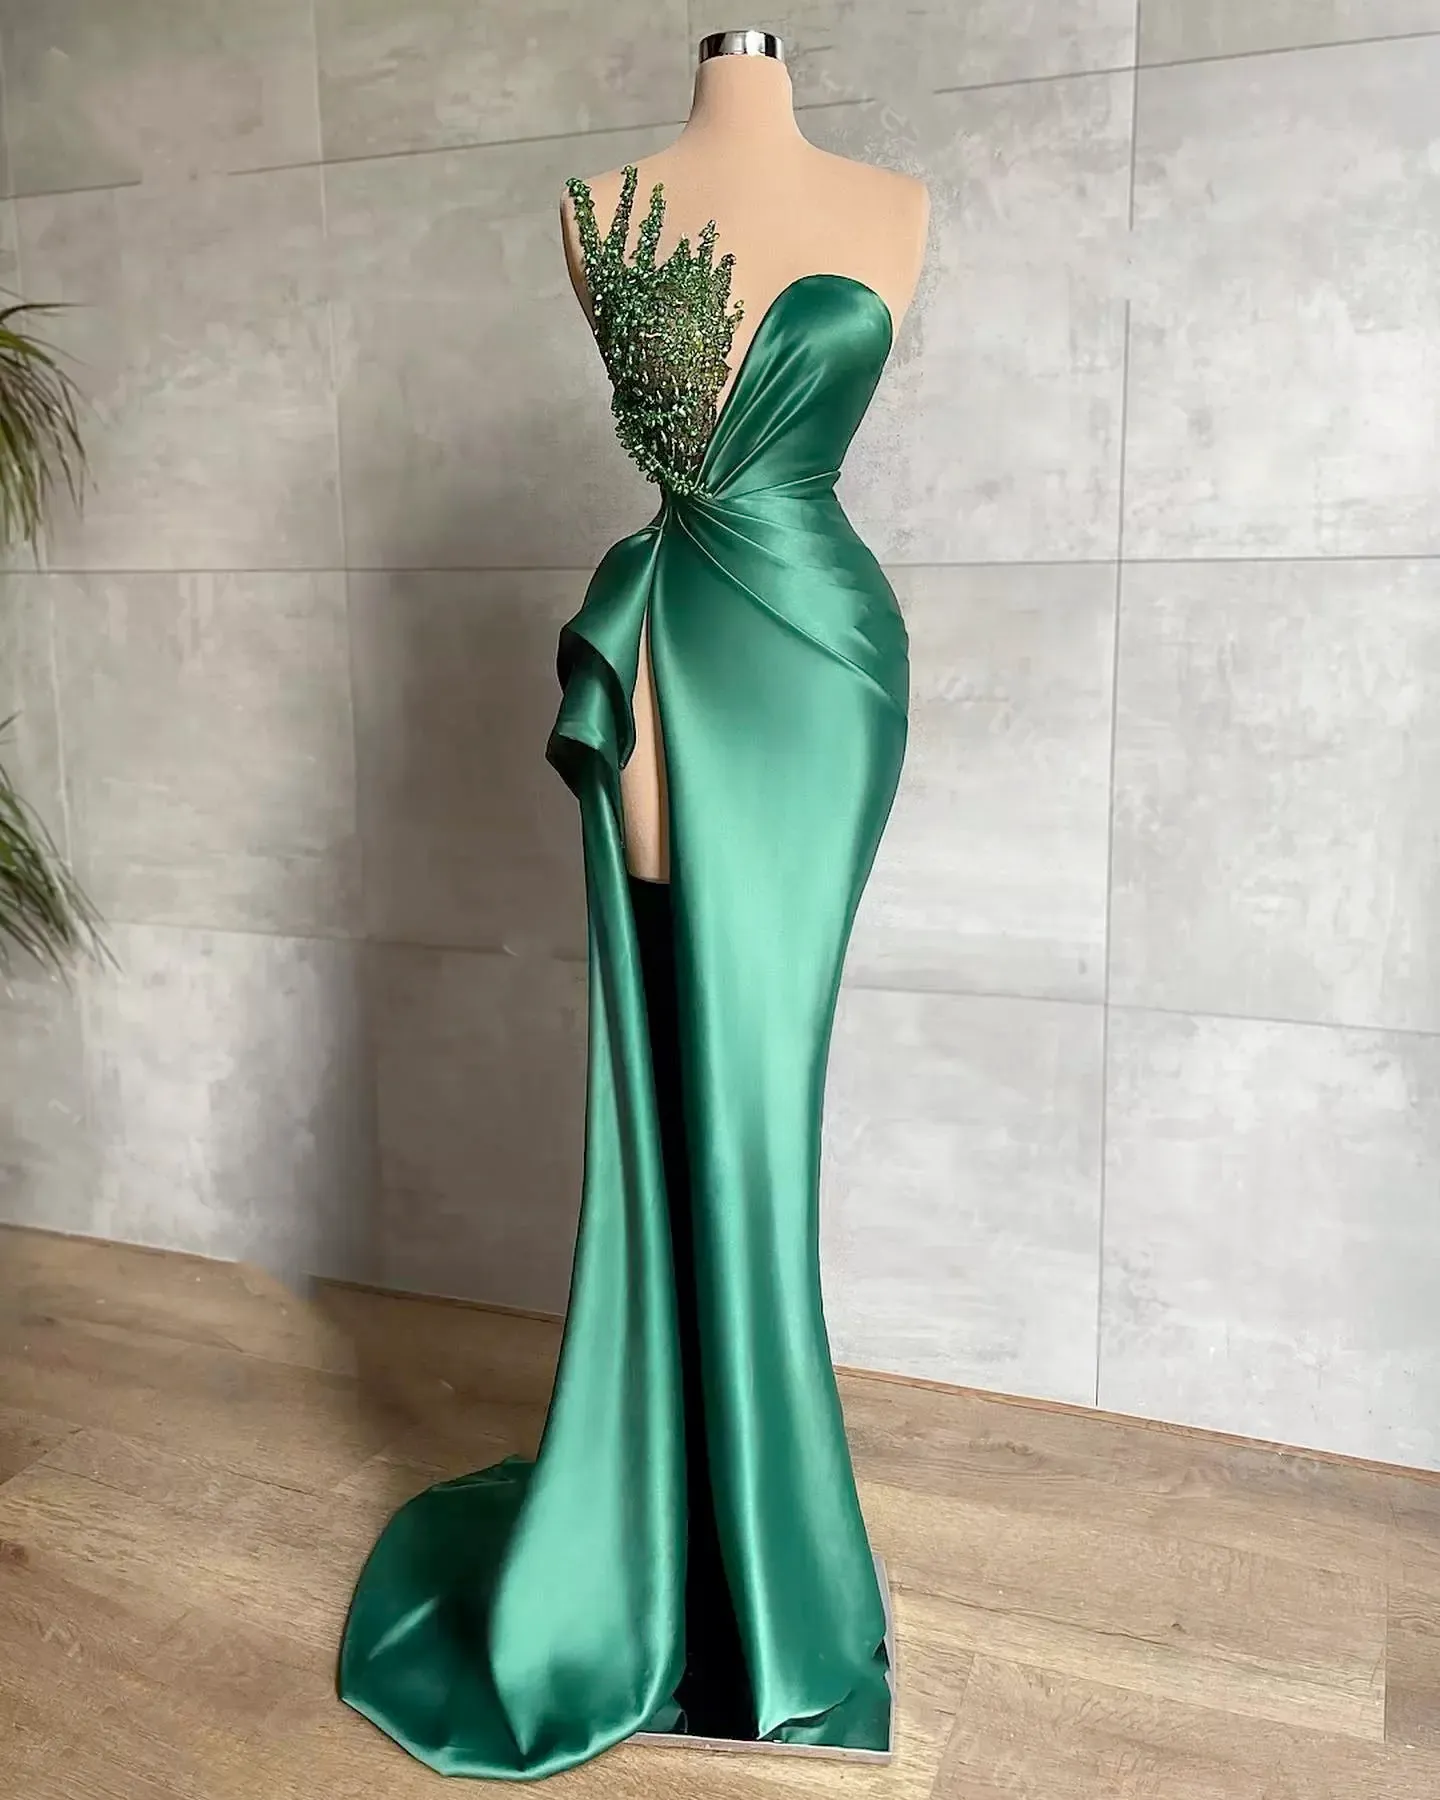 New Year's Hunter Green Mermaid Evening Dresses for African Women Long Sexy Side High Split Shiny Beads Sleeveless Formal Party Illusion Prom Party Gowns